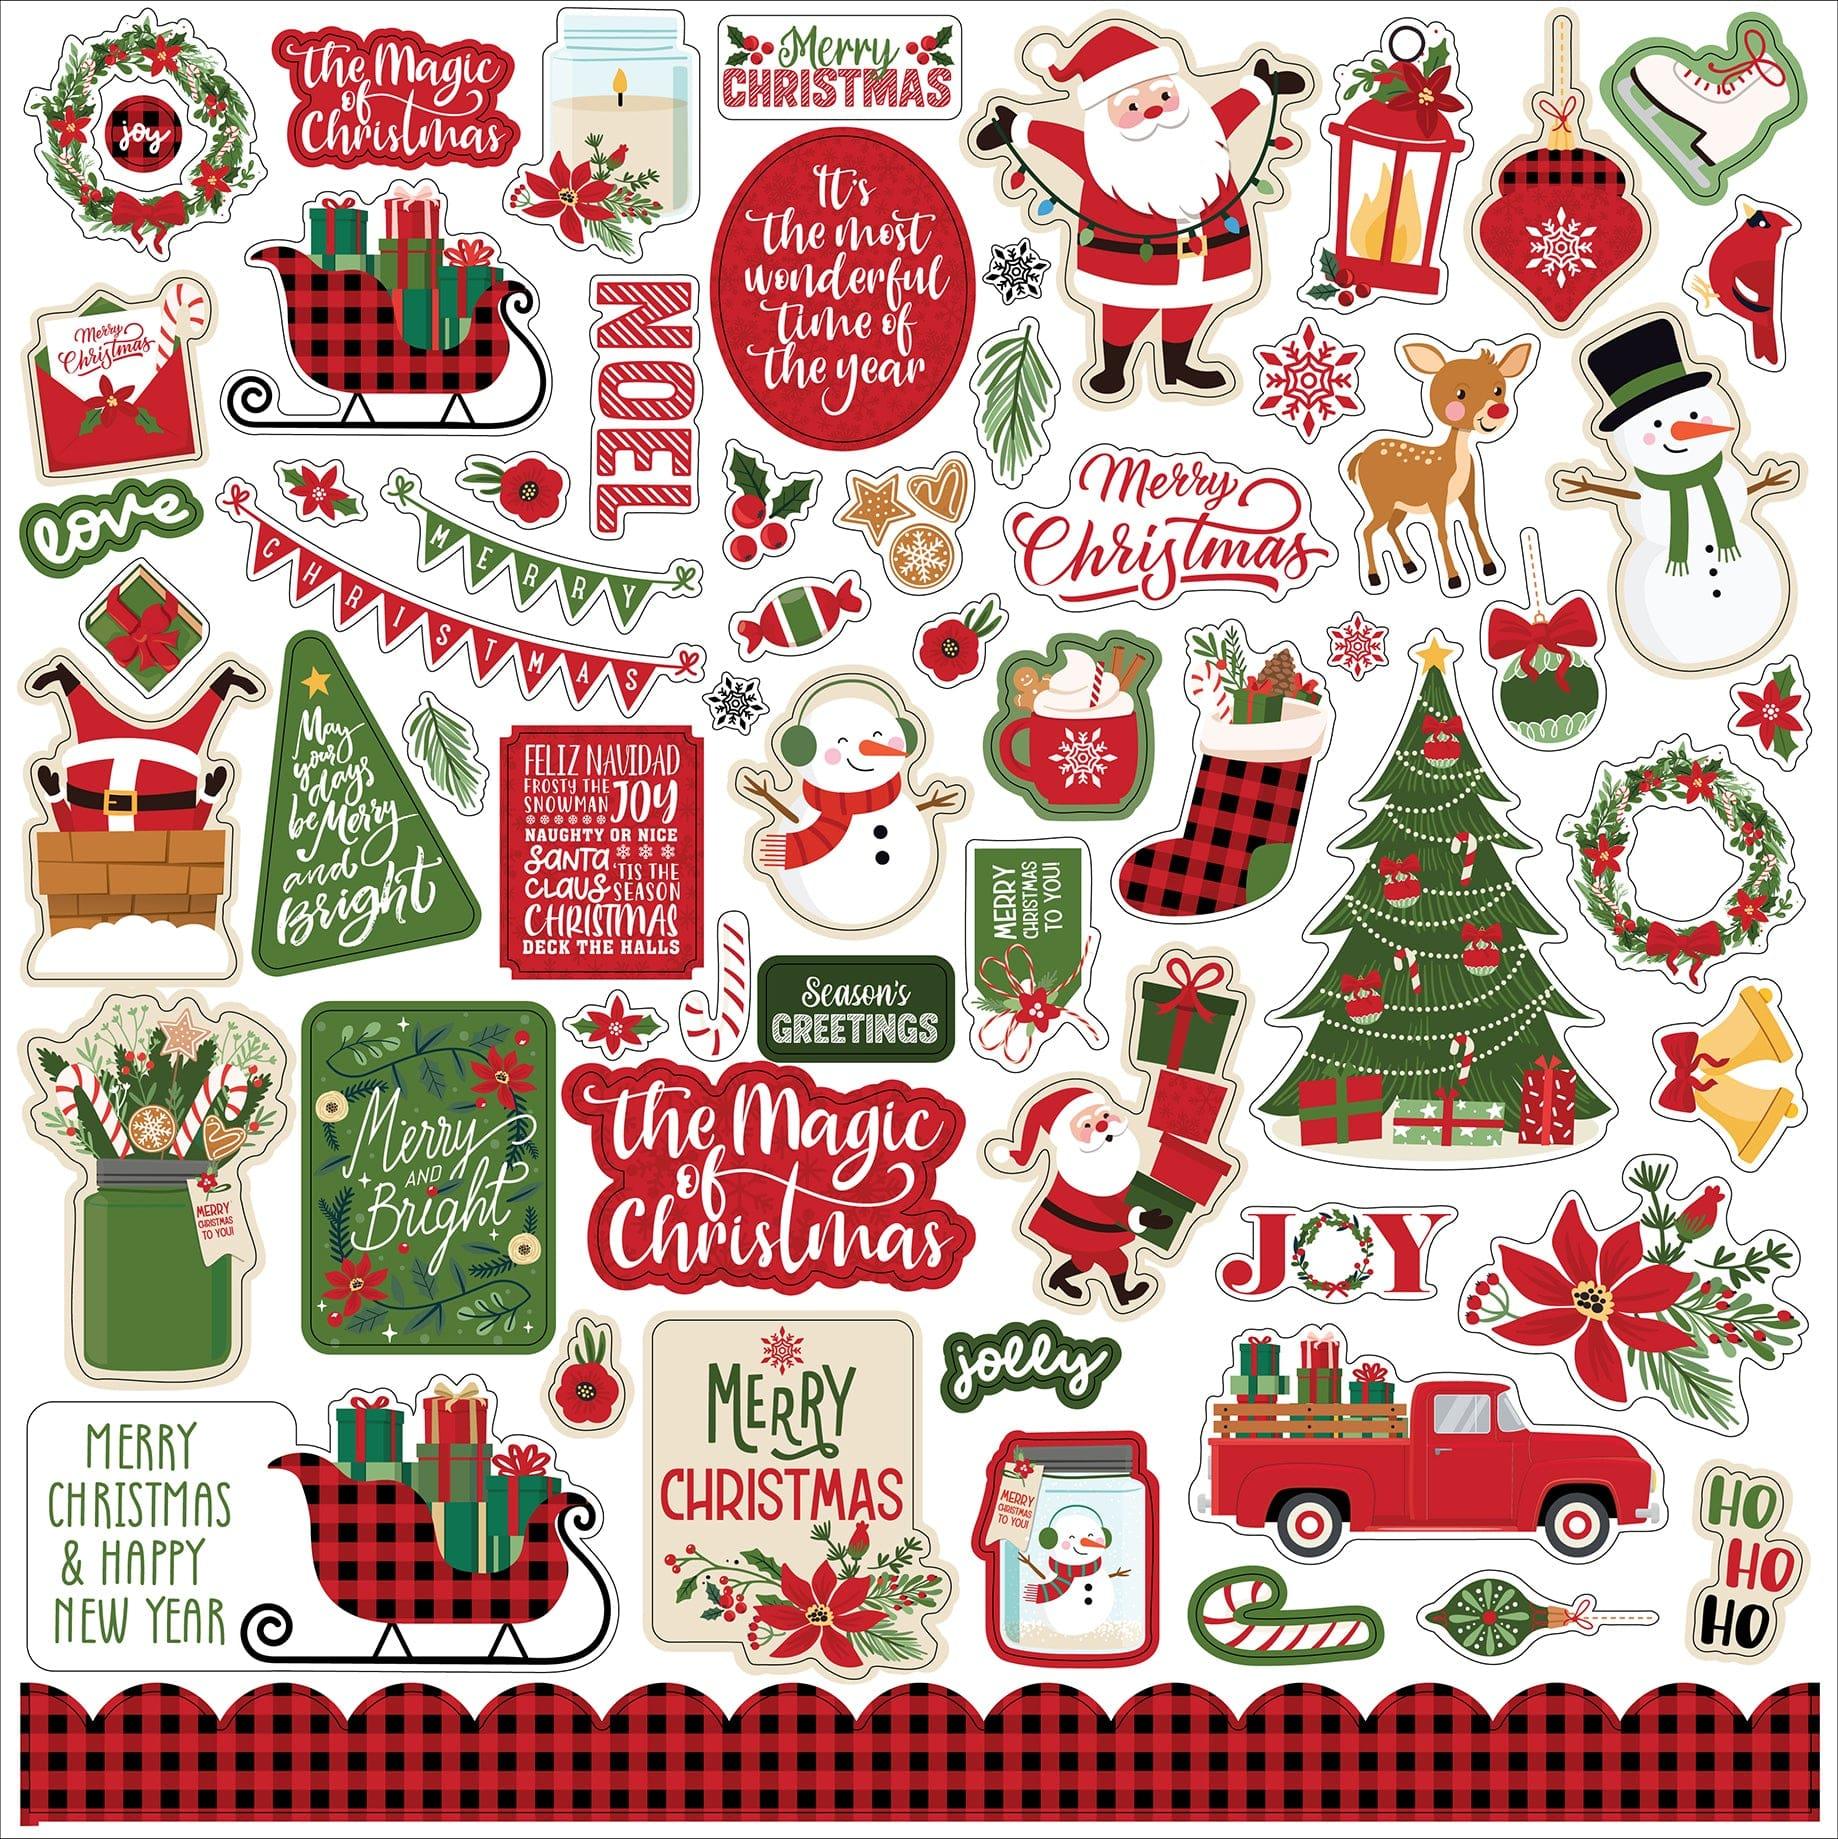 The Magic of Christmas Collection 12 x 12 Scrapbook Sticker Sheet by Echo Park Paper - Scrapbook Supply Companies